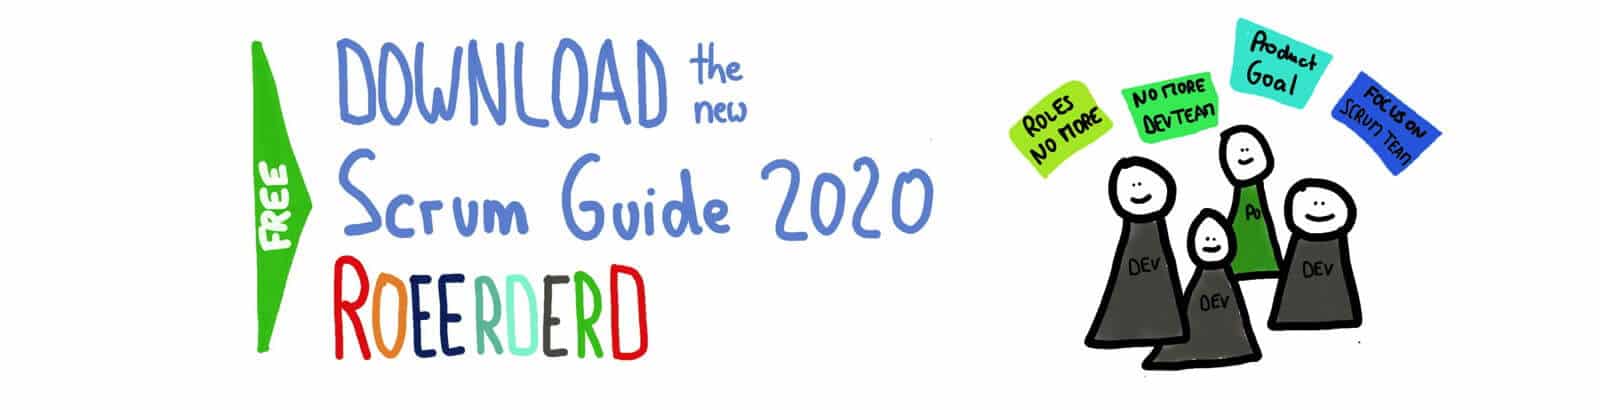 Scrum Guide 2020 — Download the new edition of the Scrum Guide Reordered — Age-of-Product.com